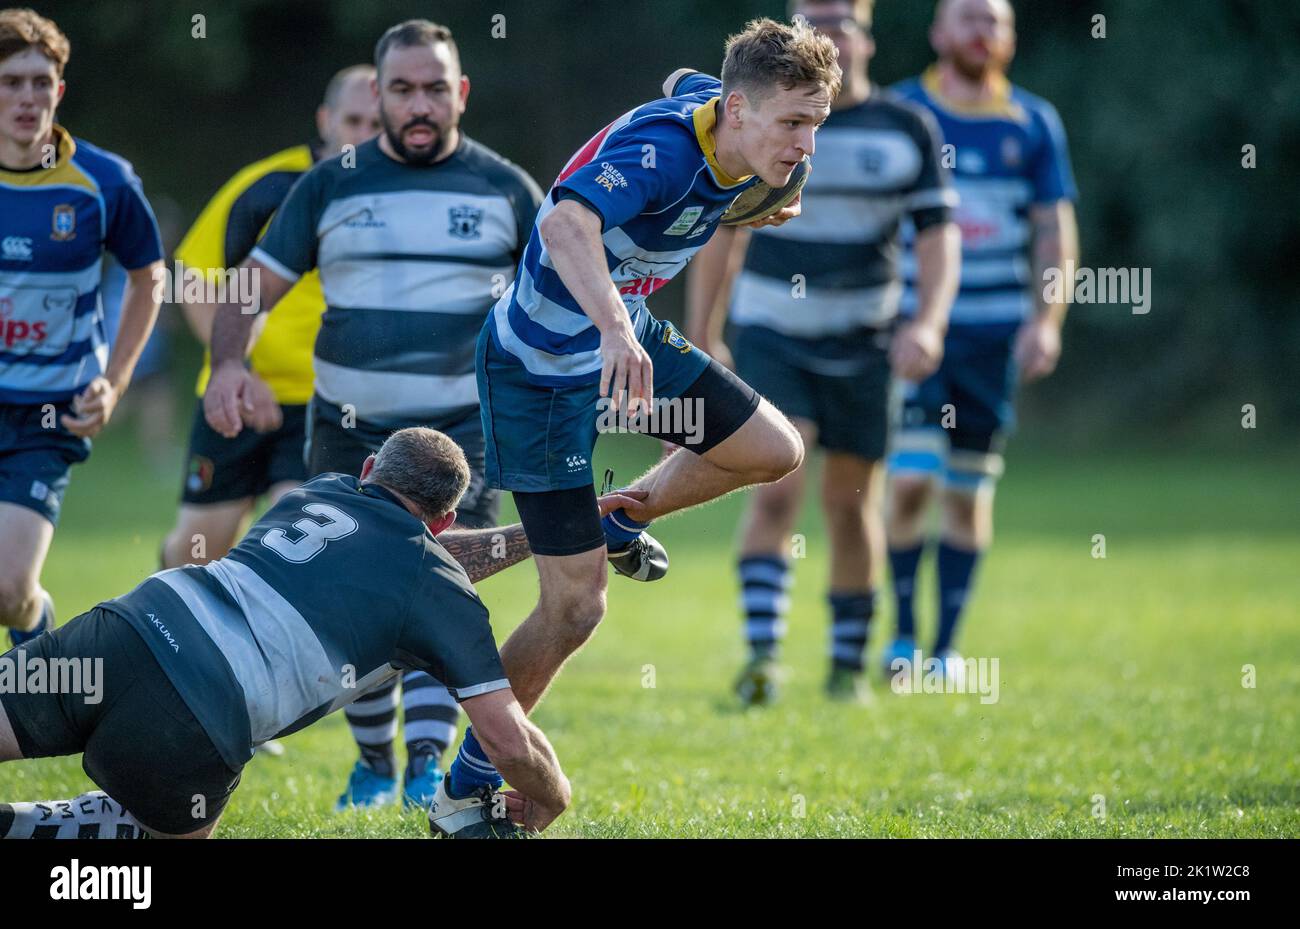 English amateur Rugby Union players playing in a league game. Stock Photo